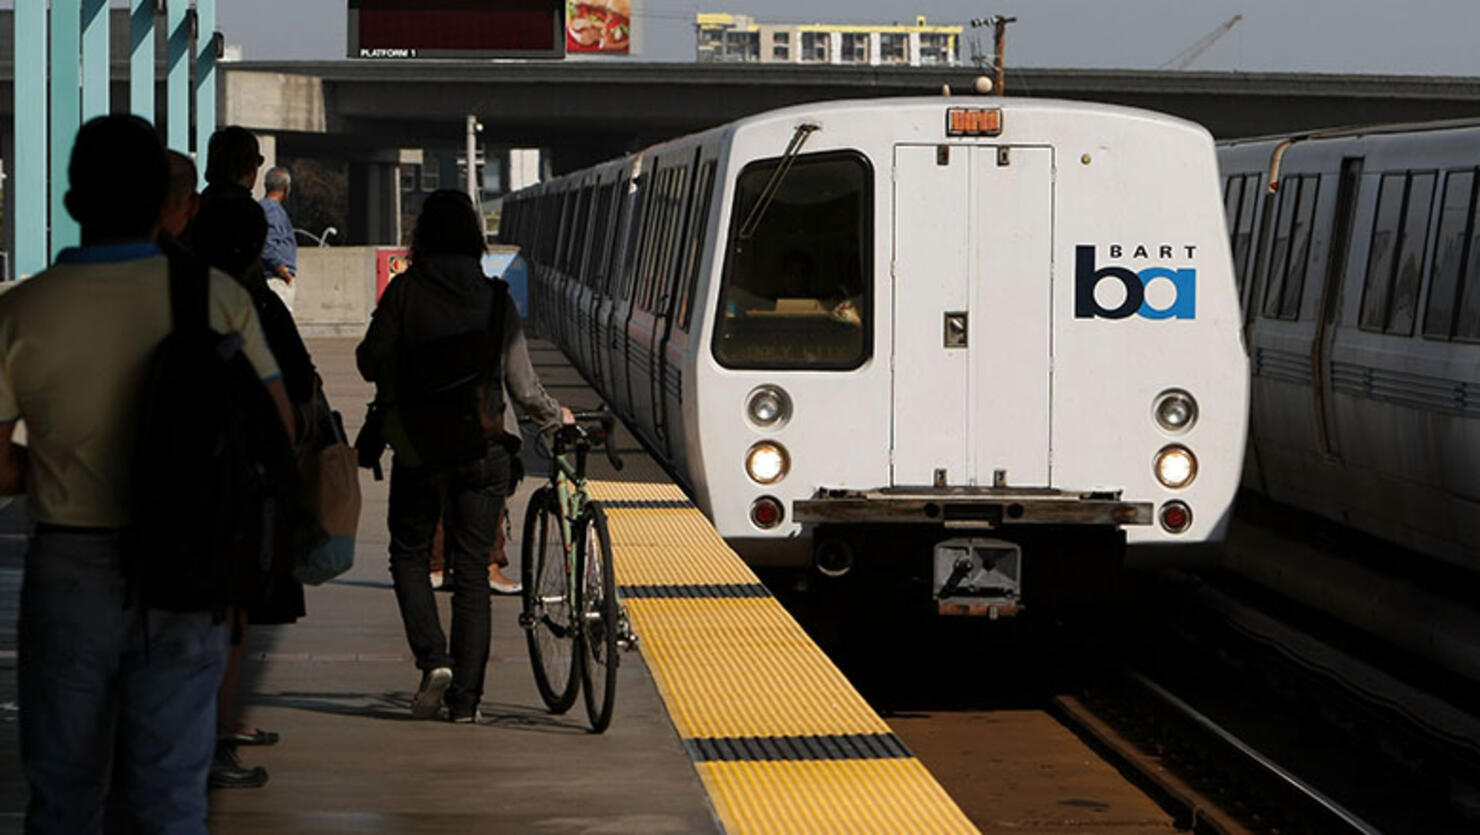 Bay Area Rapid Transit (BART) passengers stand on the platform as a train pulls into the station